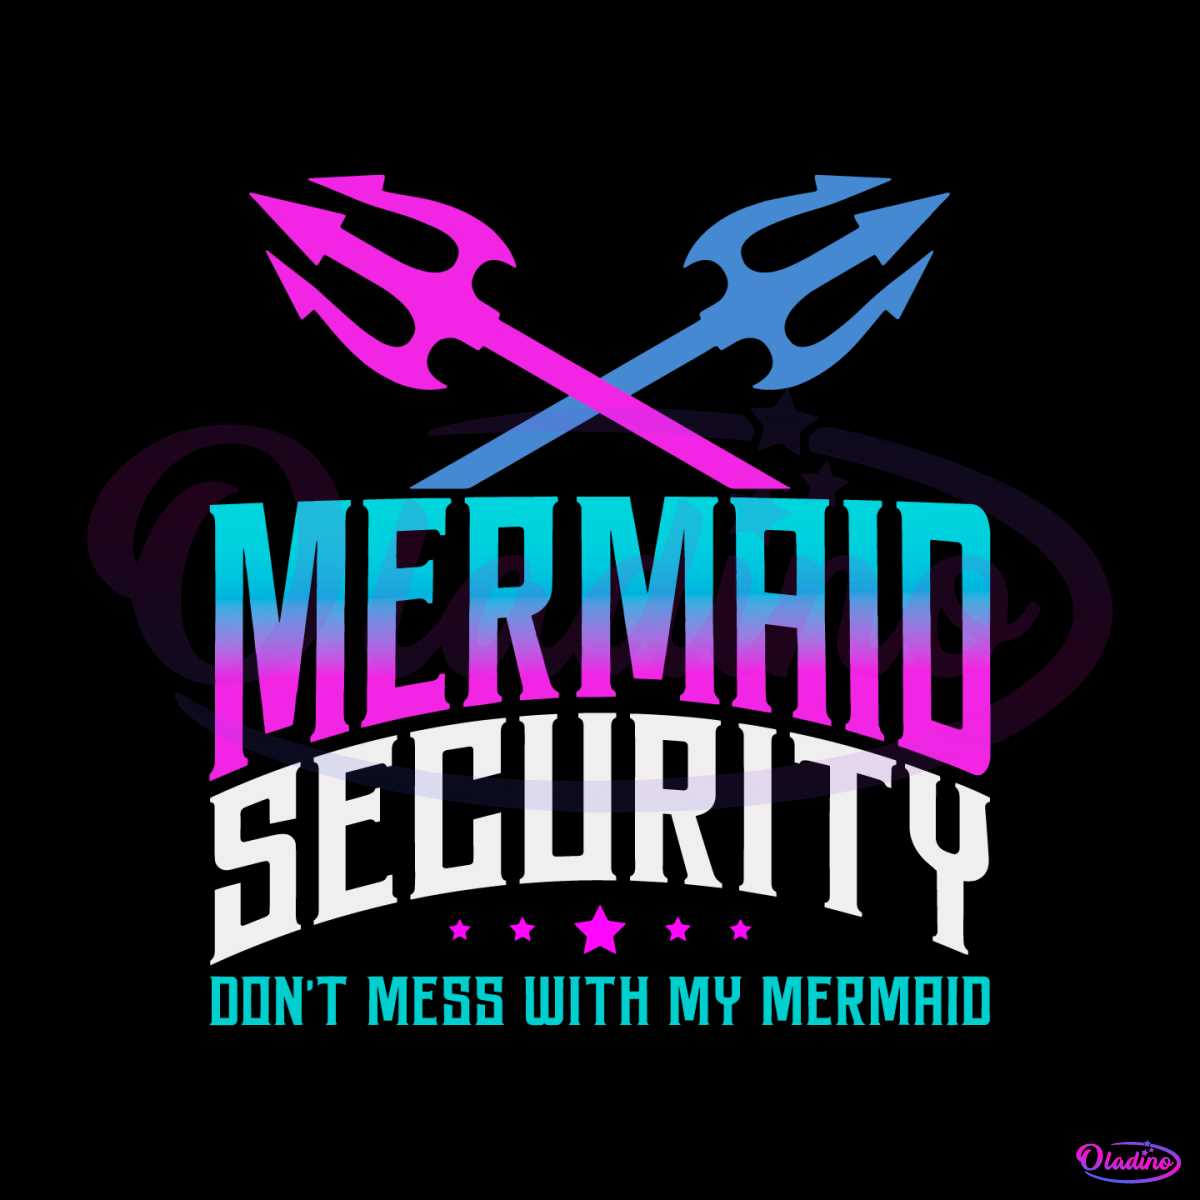 fathers-day-mermaid-security-dont-mess-with-my-mermaid-svg